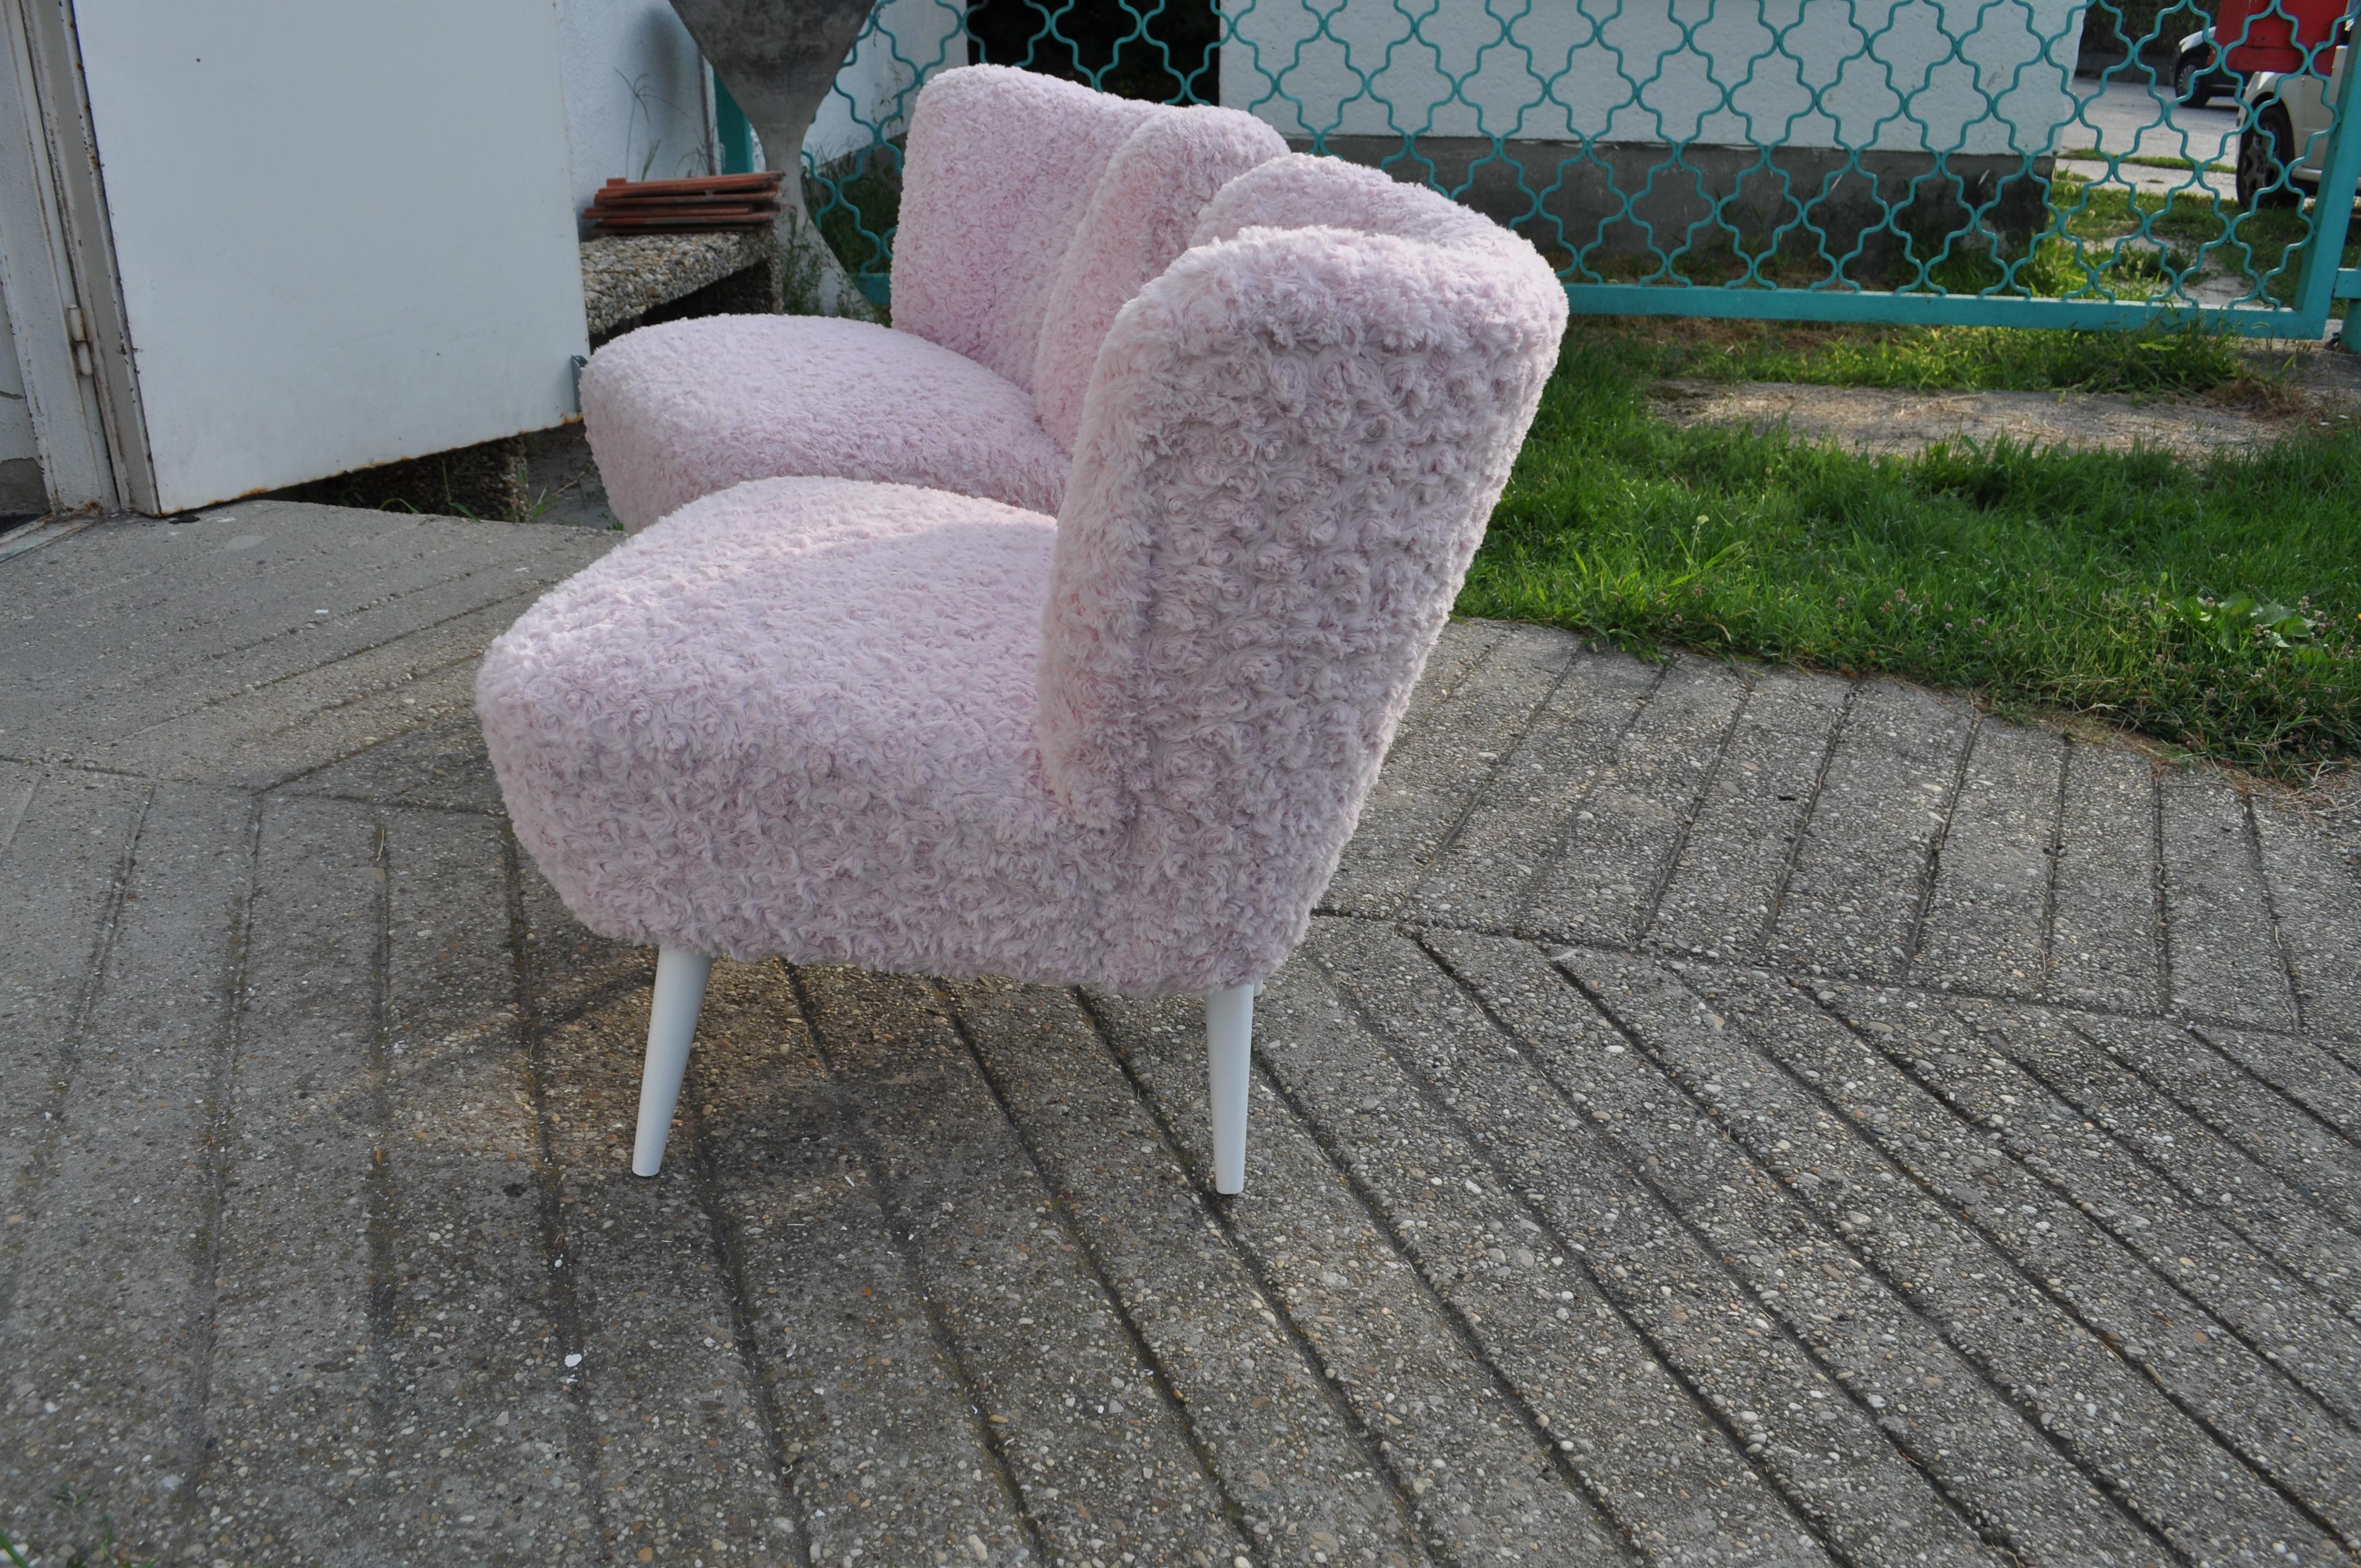 1950s shell back cocktail chairs recovered with a light pink faux fur. Very well constructed, extremely comfortable.
The pair was fully re-upholstered with a pink colored faux fur.